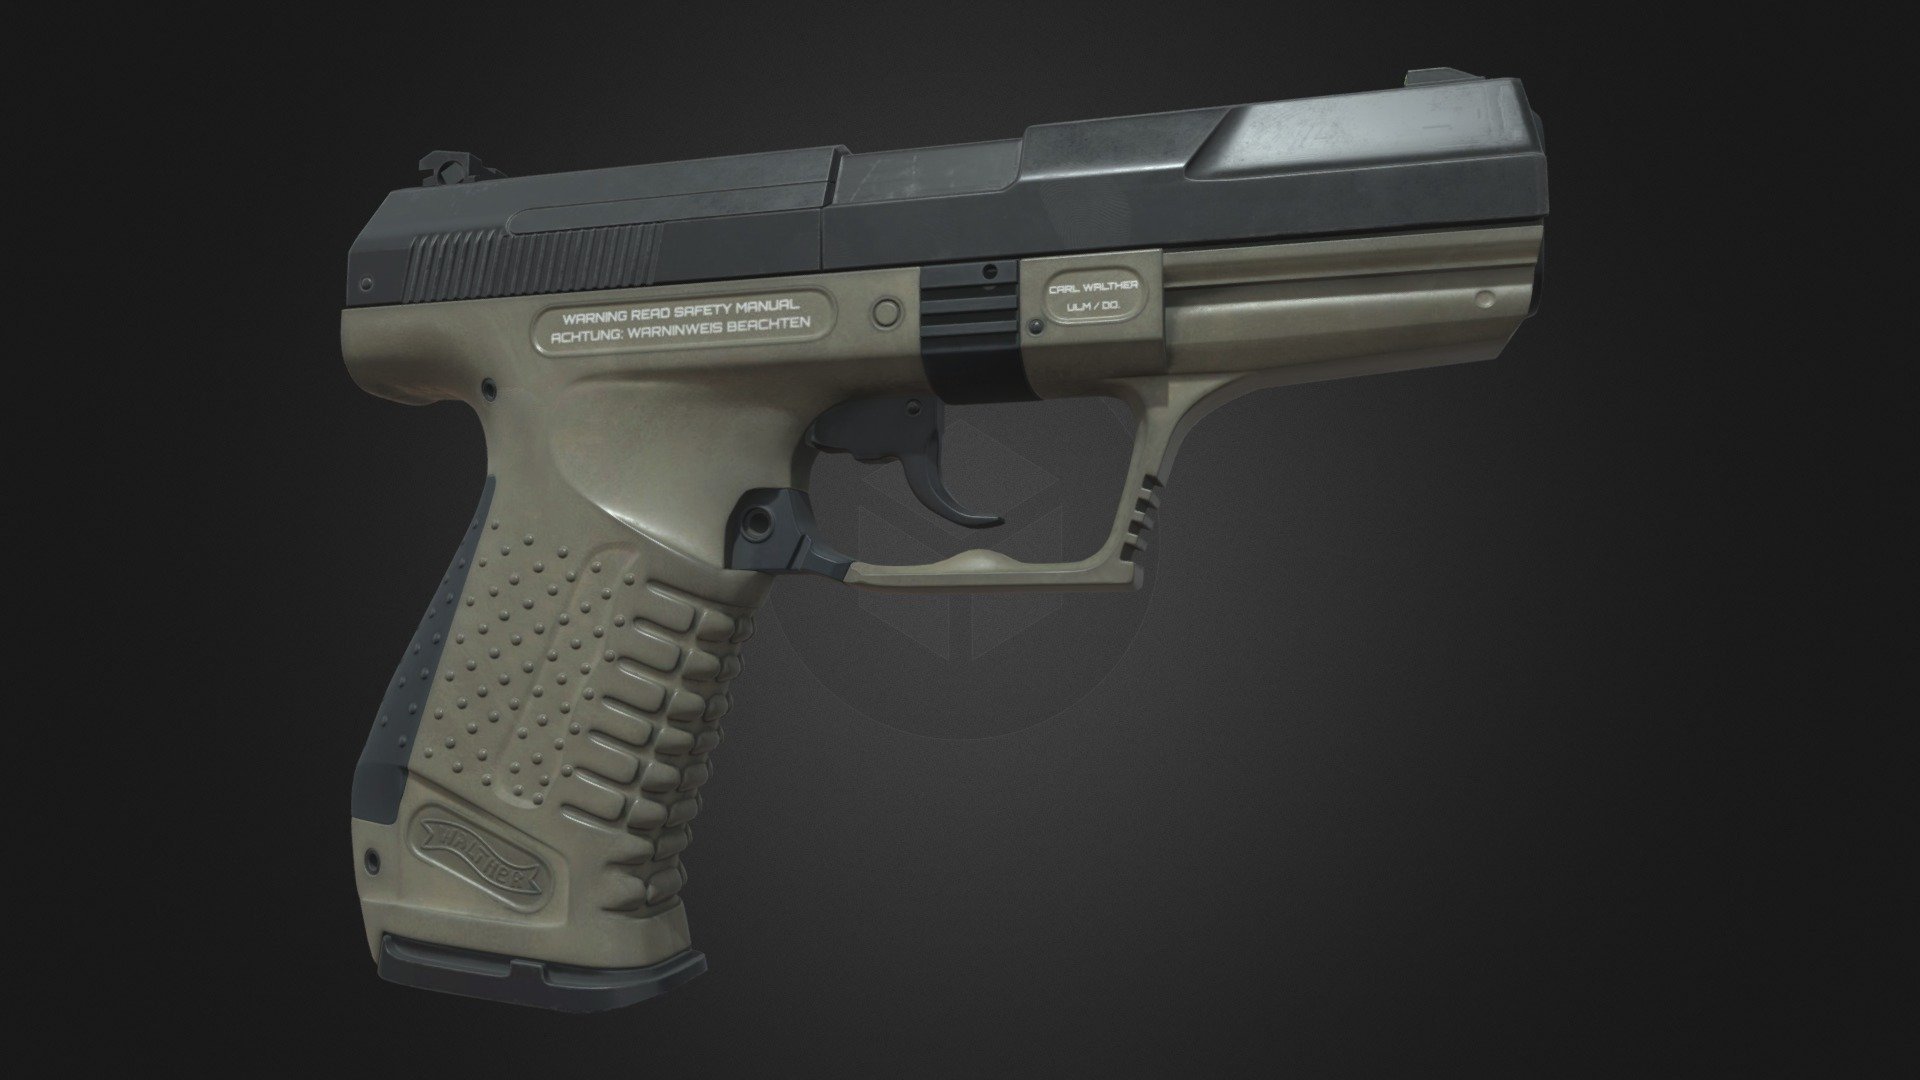 Walther P99 Semi-Automatic Pistol PBR is an optimized model with excellent texturing for best outcome.

The model has an optimized low poly mesh with the greatest possible number of simplifications that do not affect photo-realism but can help to simplify it, thus lightening your scene and allowing for using this model in real-time 3d applications.

In this product, all objects are ERROR-FREE. All LEGAL Geometry. Subdivisions are not required for this product. Real-world accurate model.


Format Type



3ds Max 2017 (Default Physical PBR Shader)

FBX

OBJ


Texture Type
2 multi/sub material used. For ironsight only 1 texture used for albedo as well emission. And 1 set of:




Albedo

Metalness

Roughness

Normal

AO

You might need to re-assign textures map to model in your relevant software

You might need to flip green channel of Normal map according to your relevant softwar - Walther P99 Semi-Automatic Pistol PBR - Buy Royalty Free 3D model by 3d Assets Gun (@3dassetsgun) 3d model